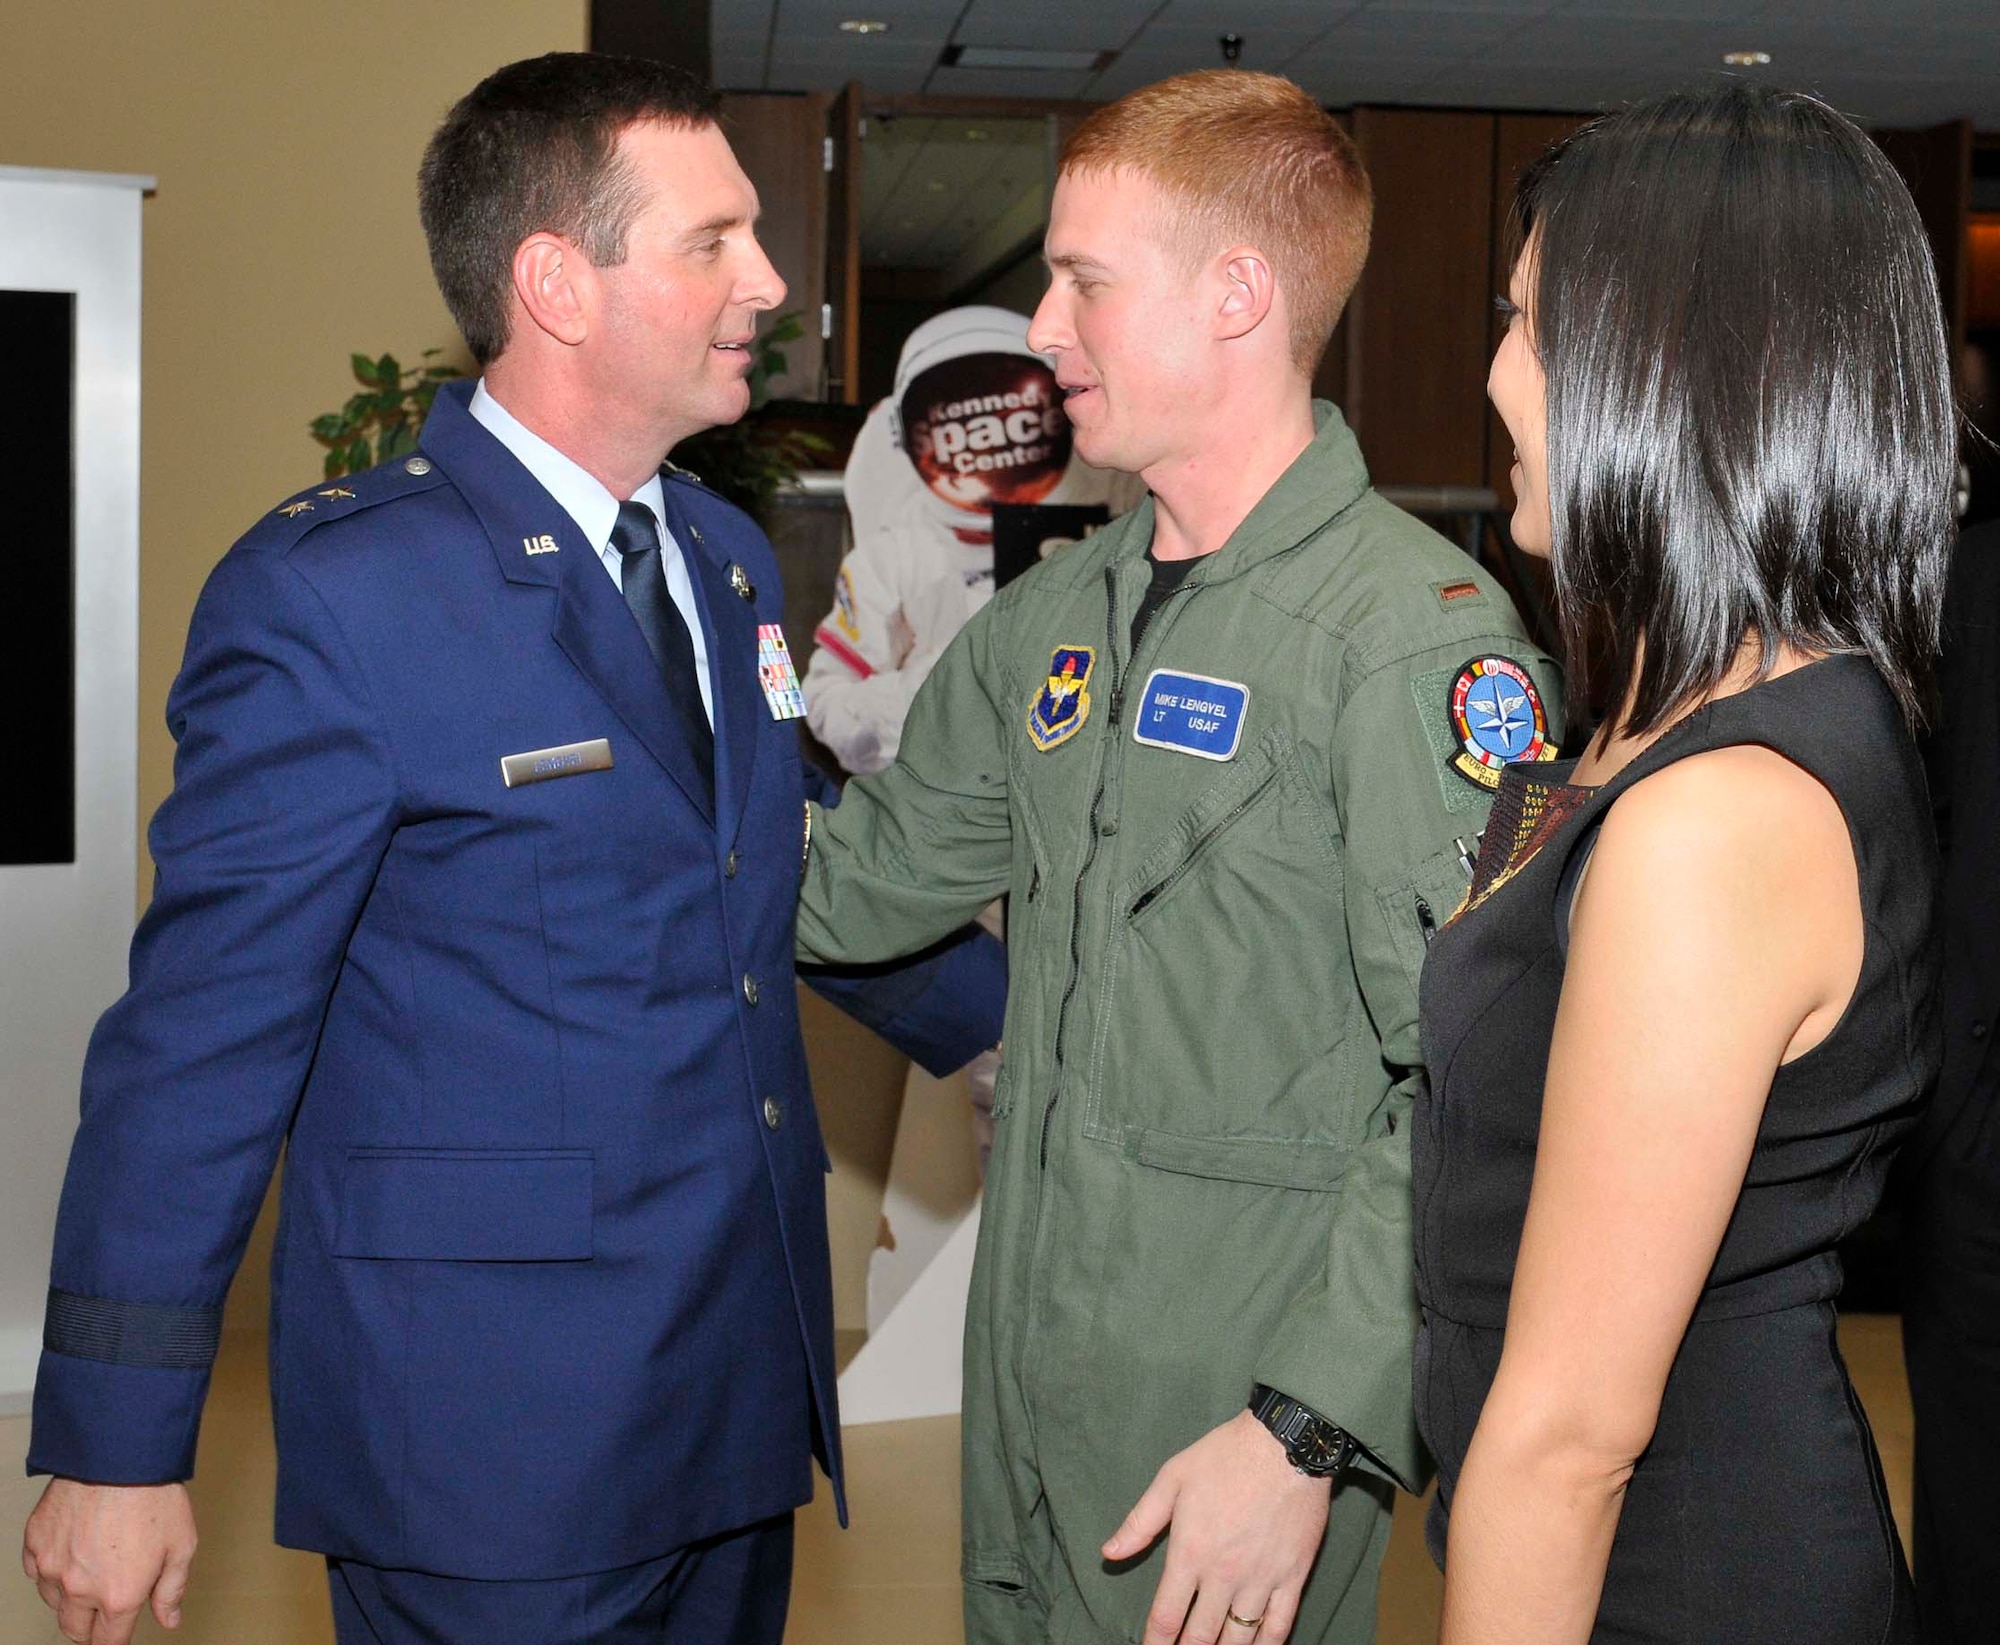 Maj. Gen. Joseph Lengyel talks with his son 2nd Lt. Michael Lengyel after his promotion ceremony at Tyndall Air Force Base, Fla., April 1. General Lengyel is the 1st Air Force (Air Forces Northern) vice commander. (U.S. Air Force photo by Lisa Norman)